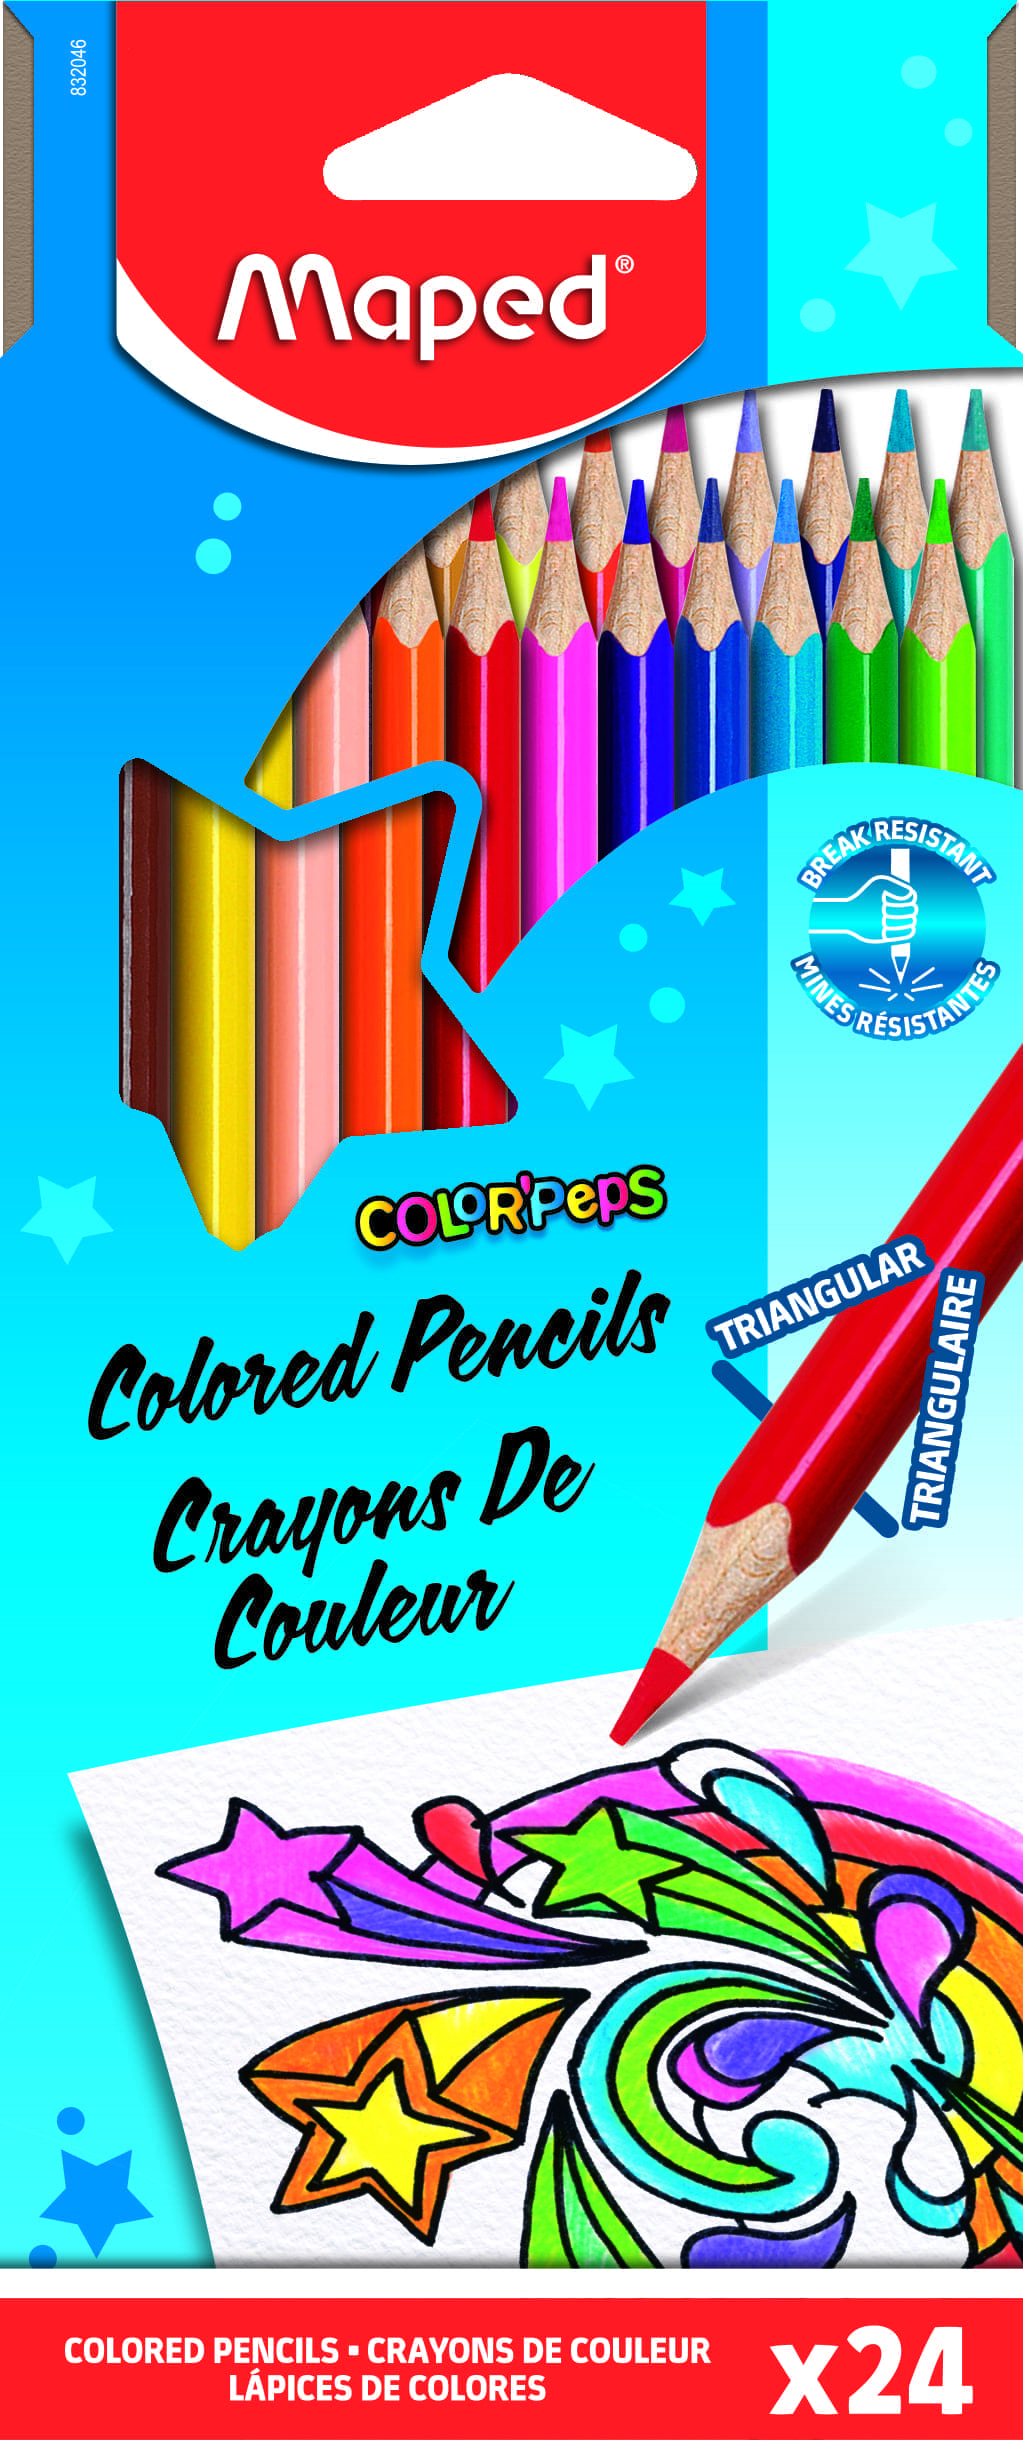 Maped Color'Peps Triangular Colored Pencils, Assorted Colors, Pack